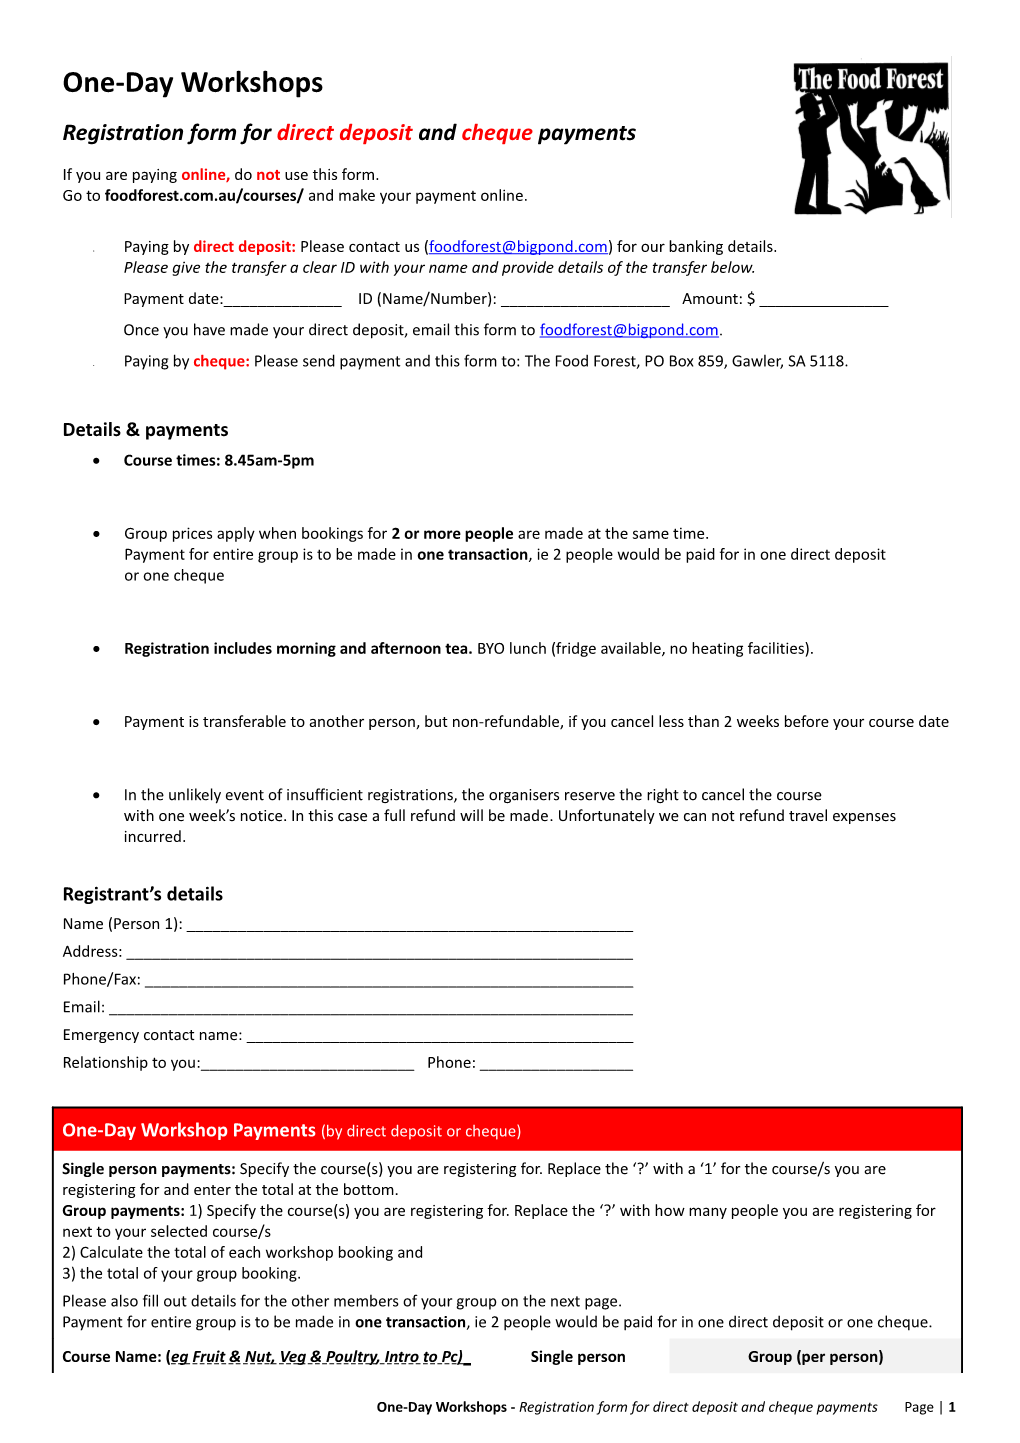 Registration Form for Direct Deposit and Cheque Payments